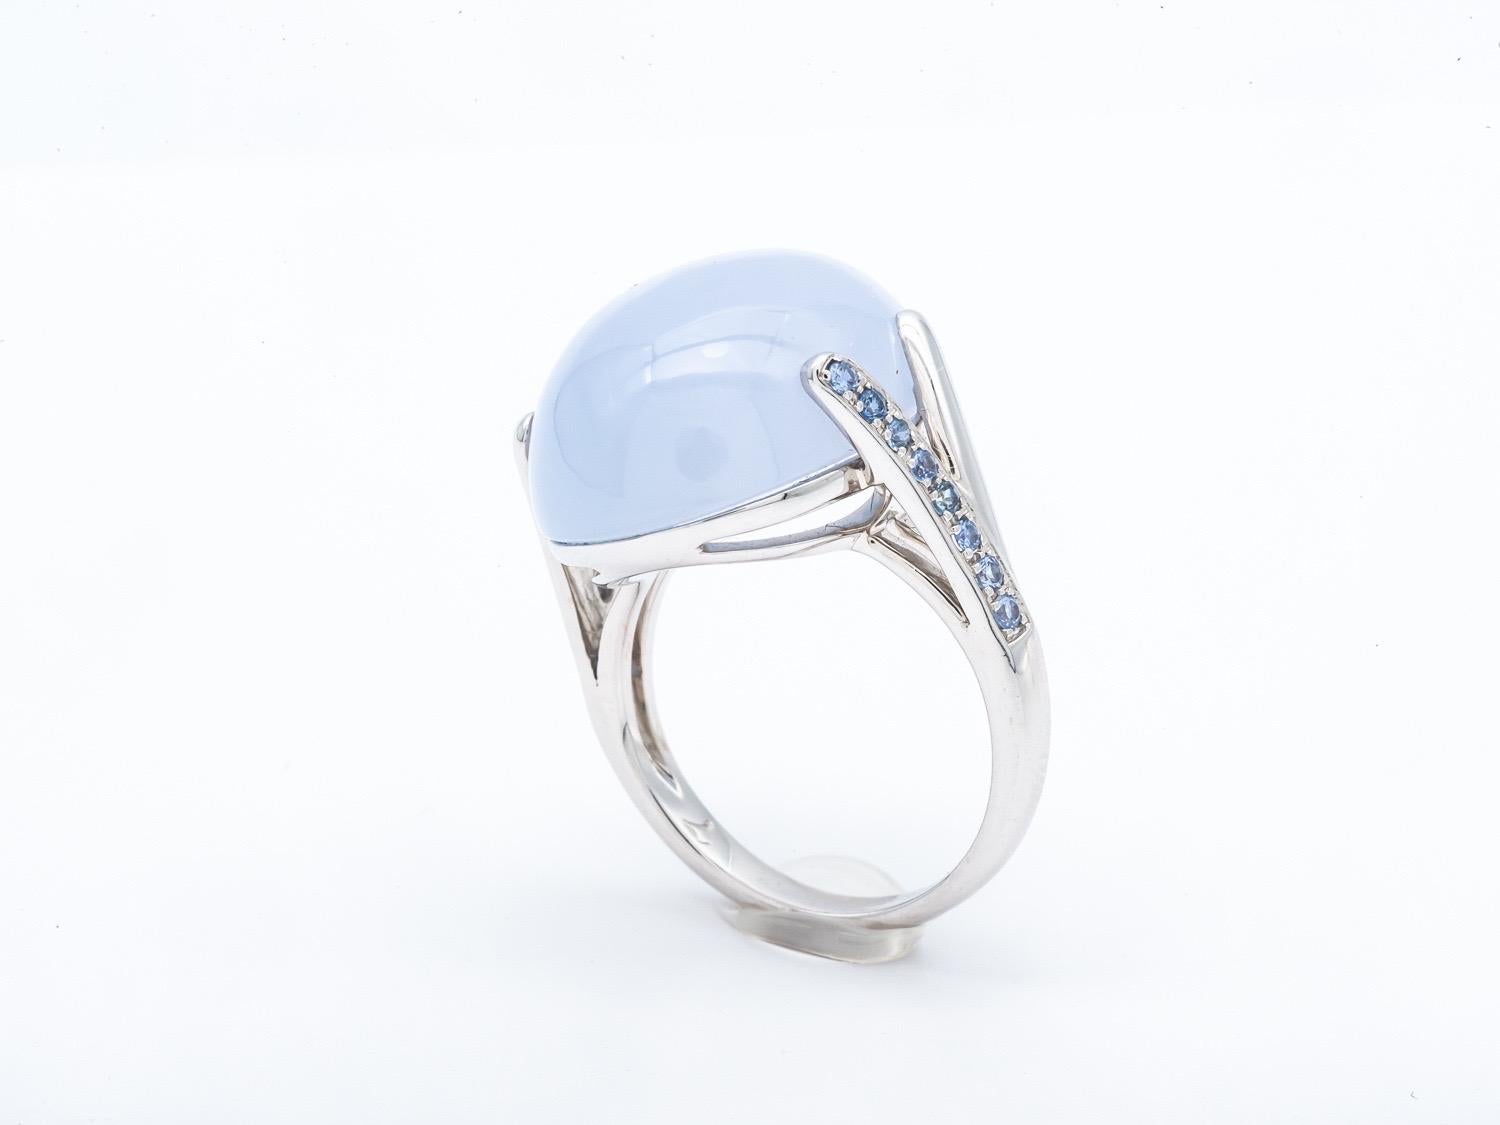 Discover the timeless elegance and charm of this Art Deco-style ring in 18-carat white gold, topped with a sumptuous chalcedony cabochon and adorned with sparkling blue sapphires. This ring is a true work of art, harmoniously blending the iconic